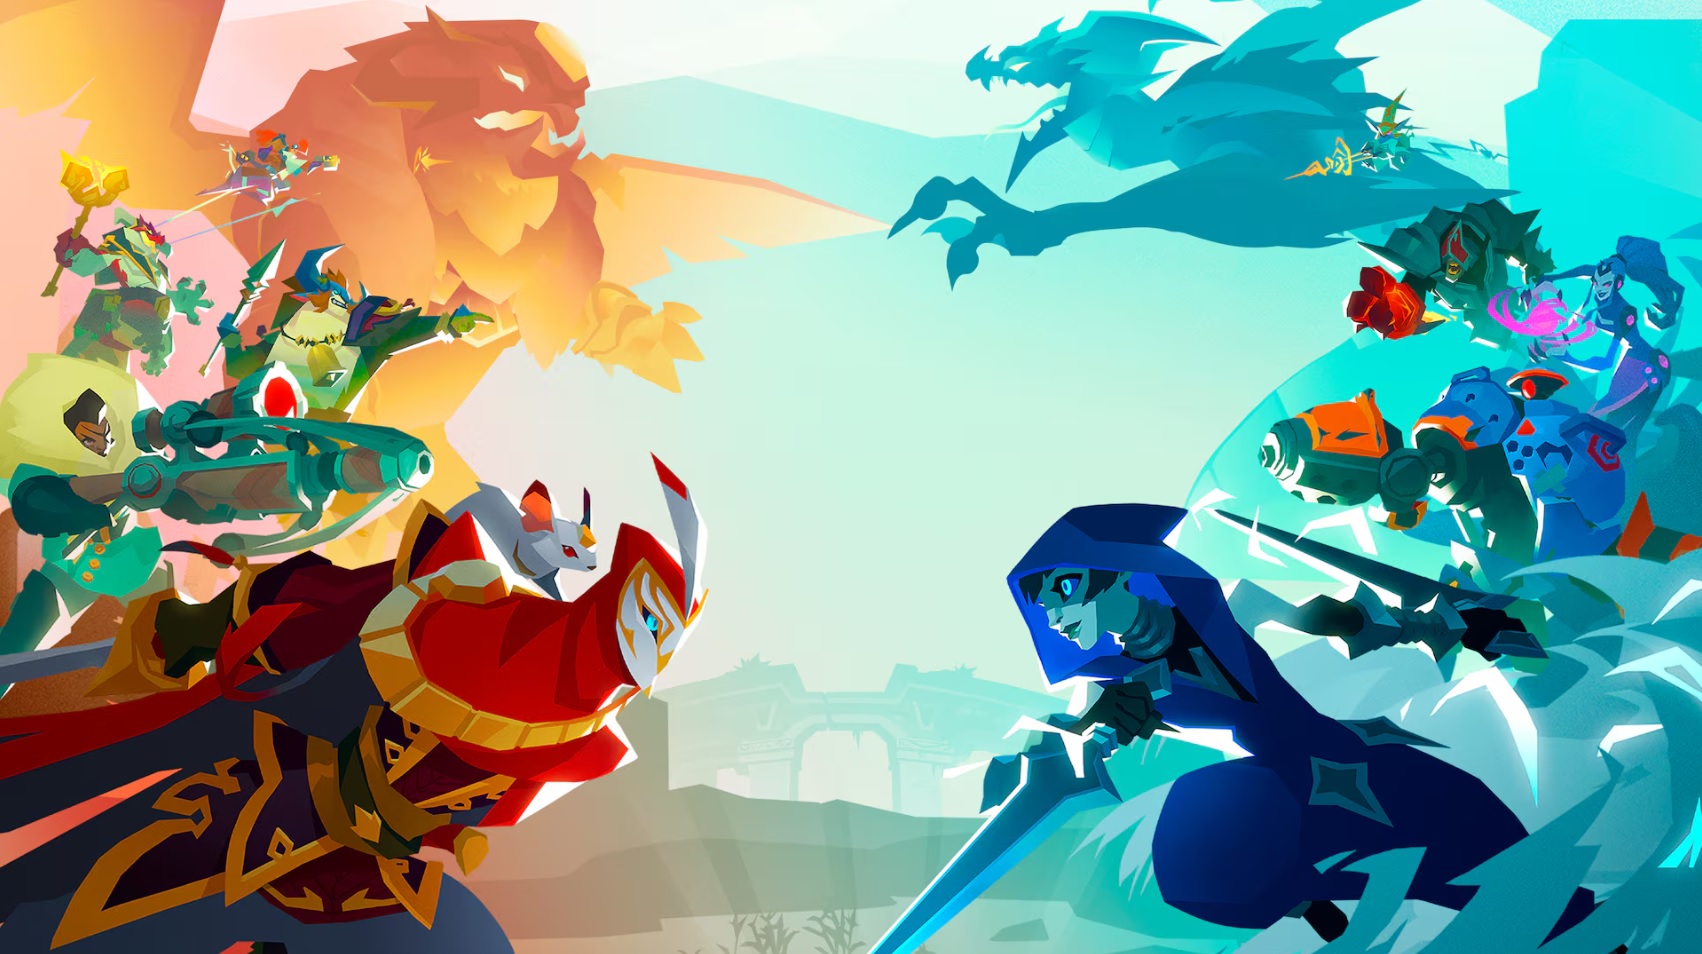 MOBA-Shooter Gigantic returns free of microtransactions with Rampage Edition